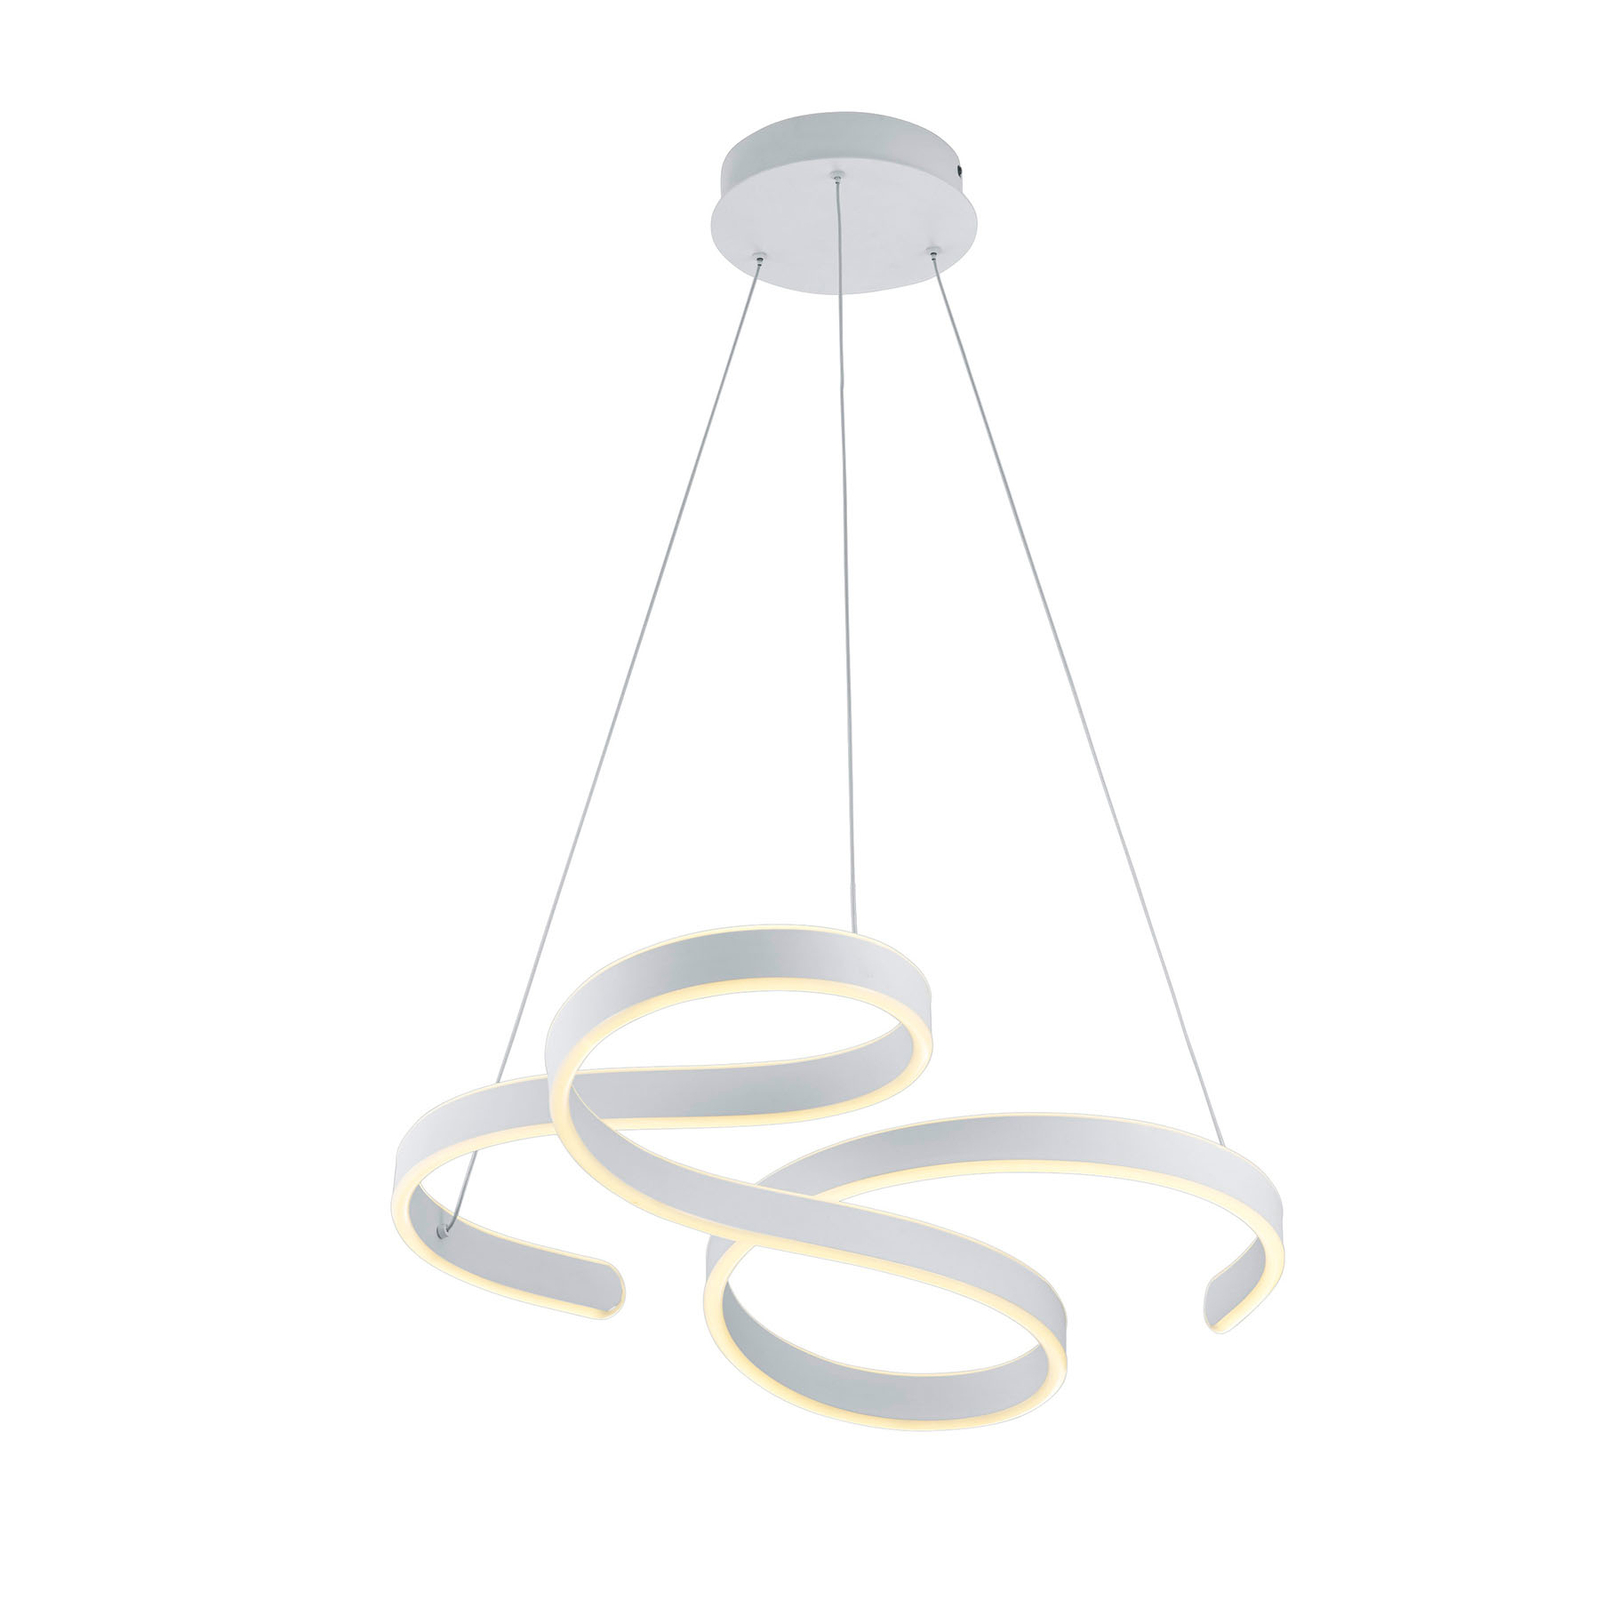 Suspension LED Francis, blanche mate